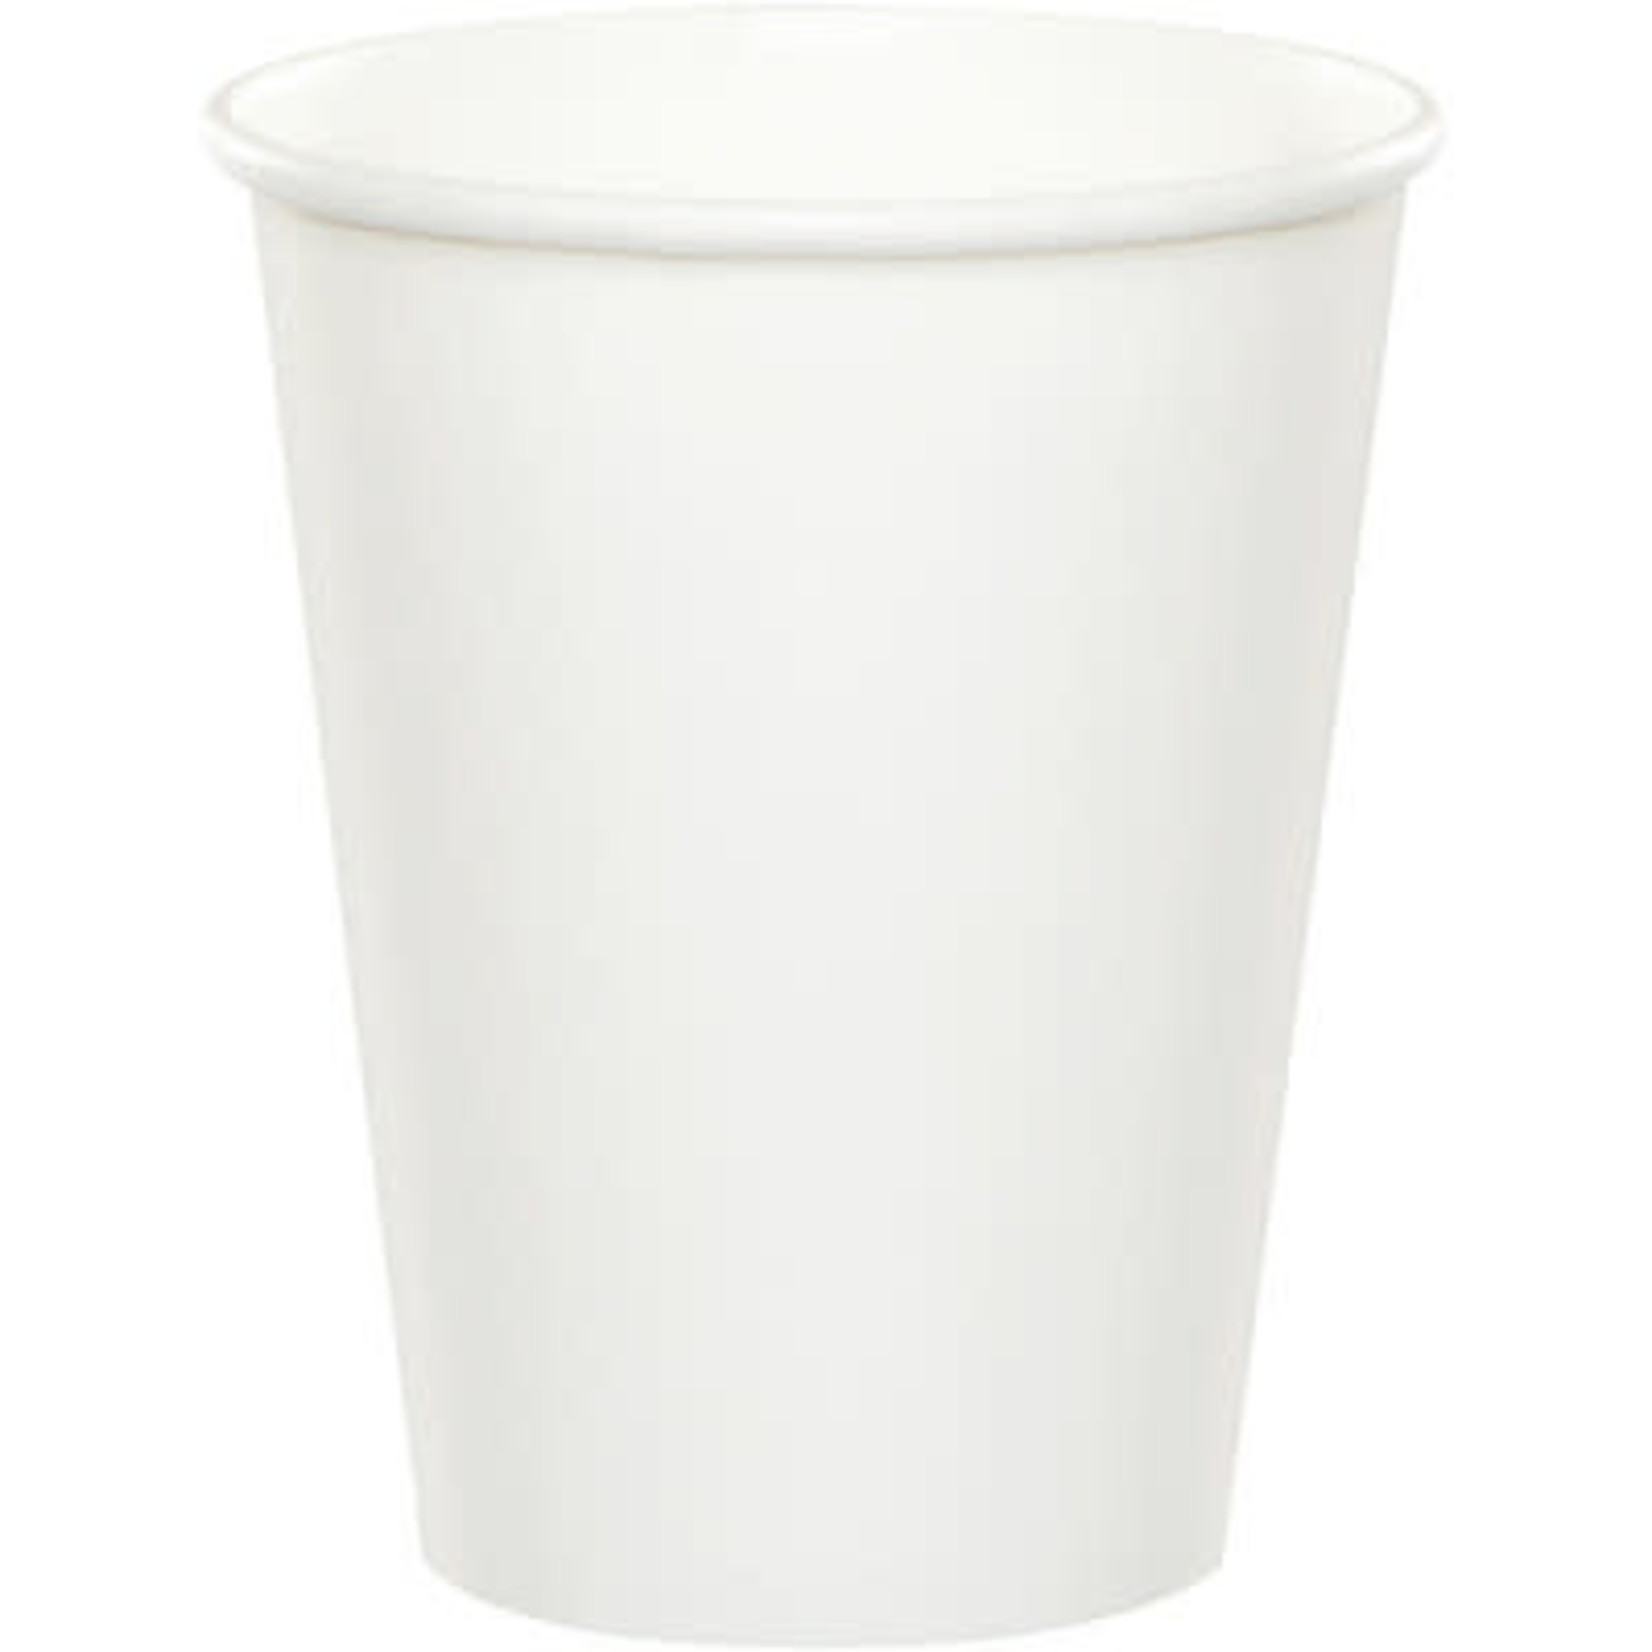 Touch of Color 9oz. White Hot/Cold Paper Cups - 24ct.